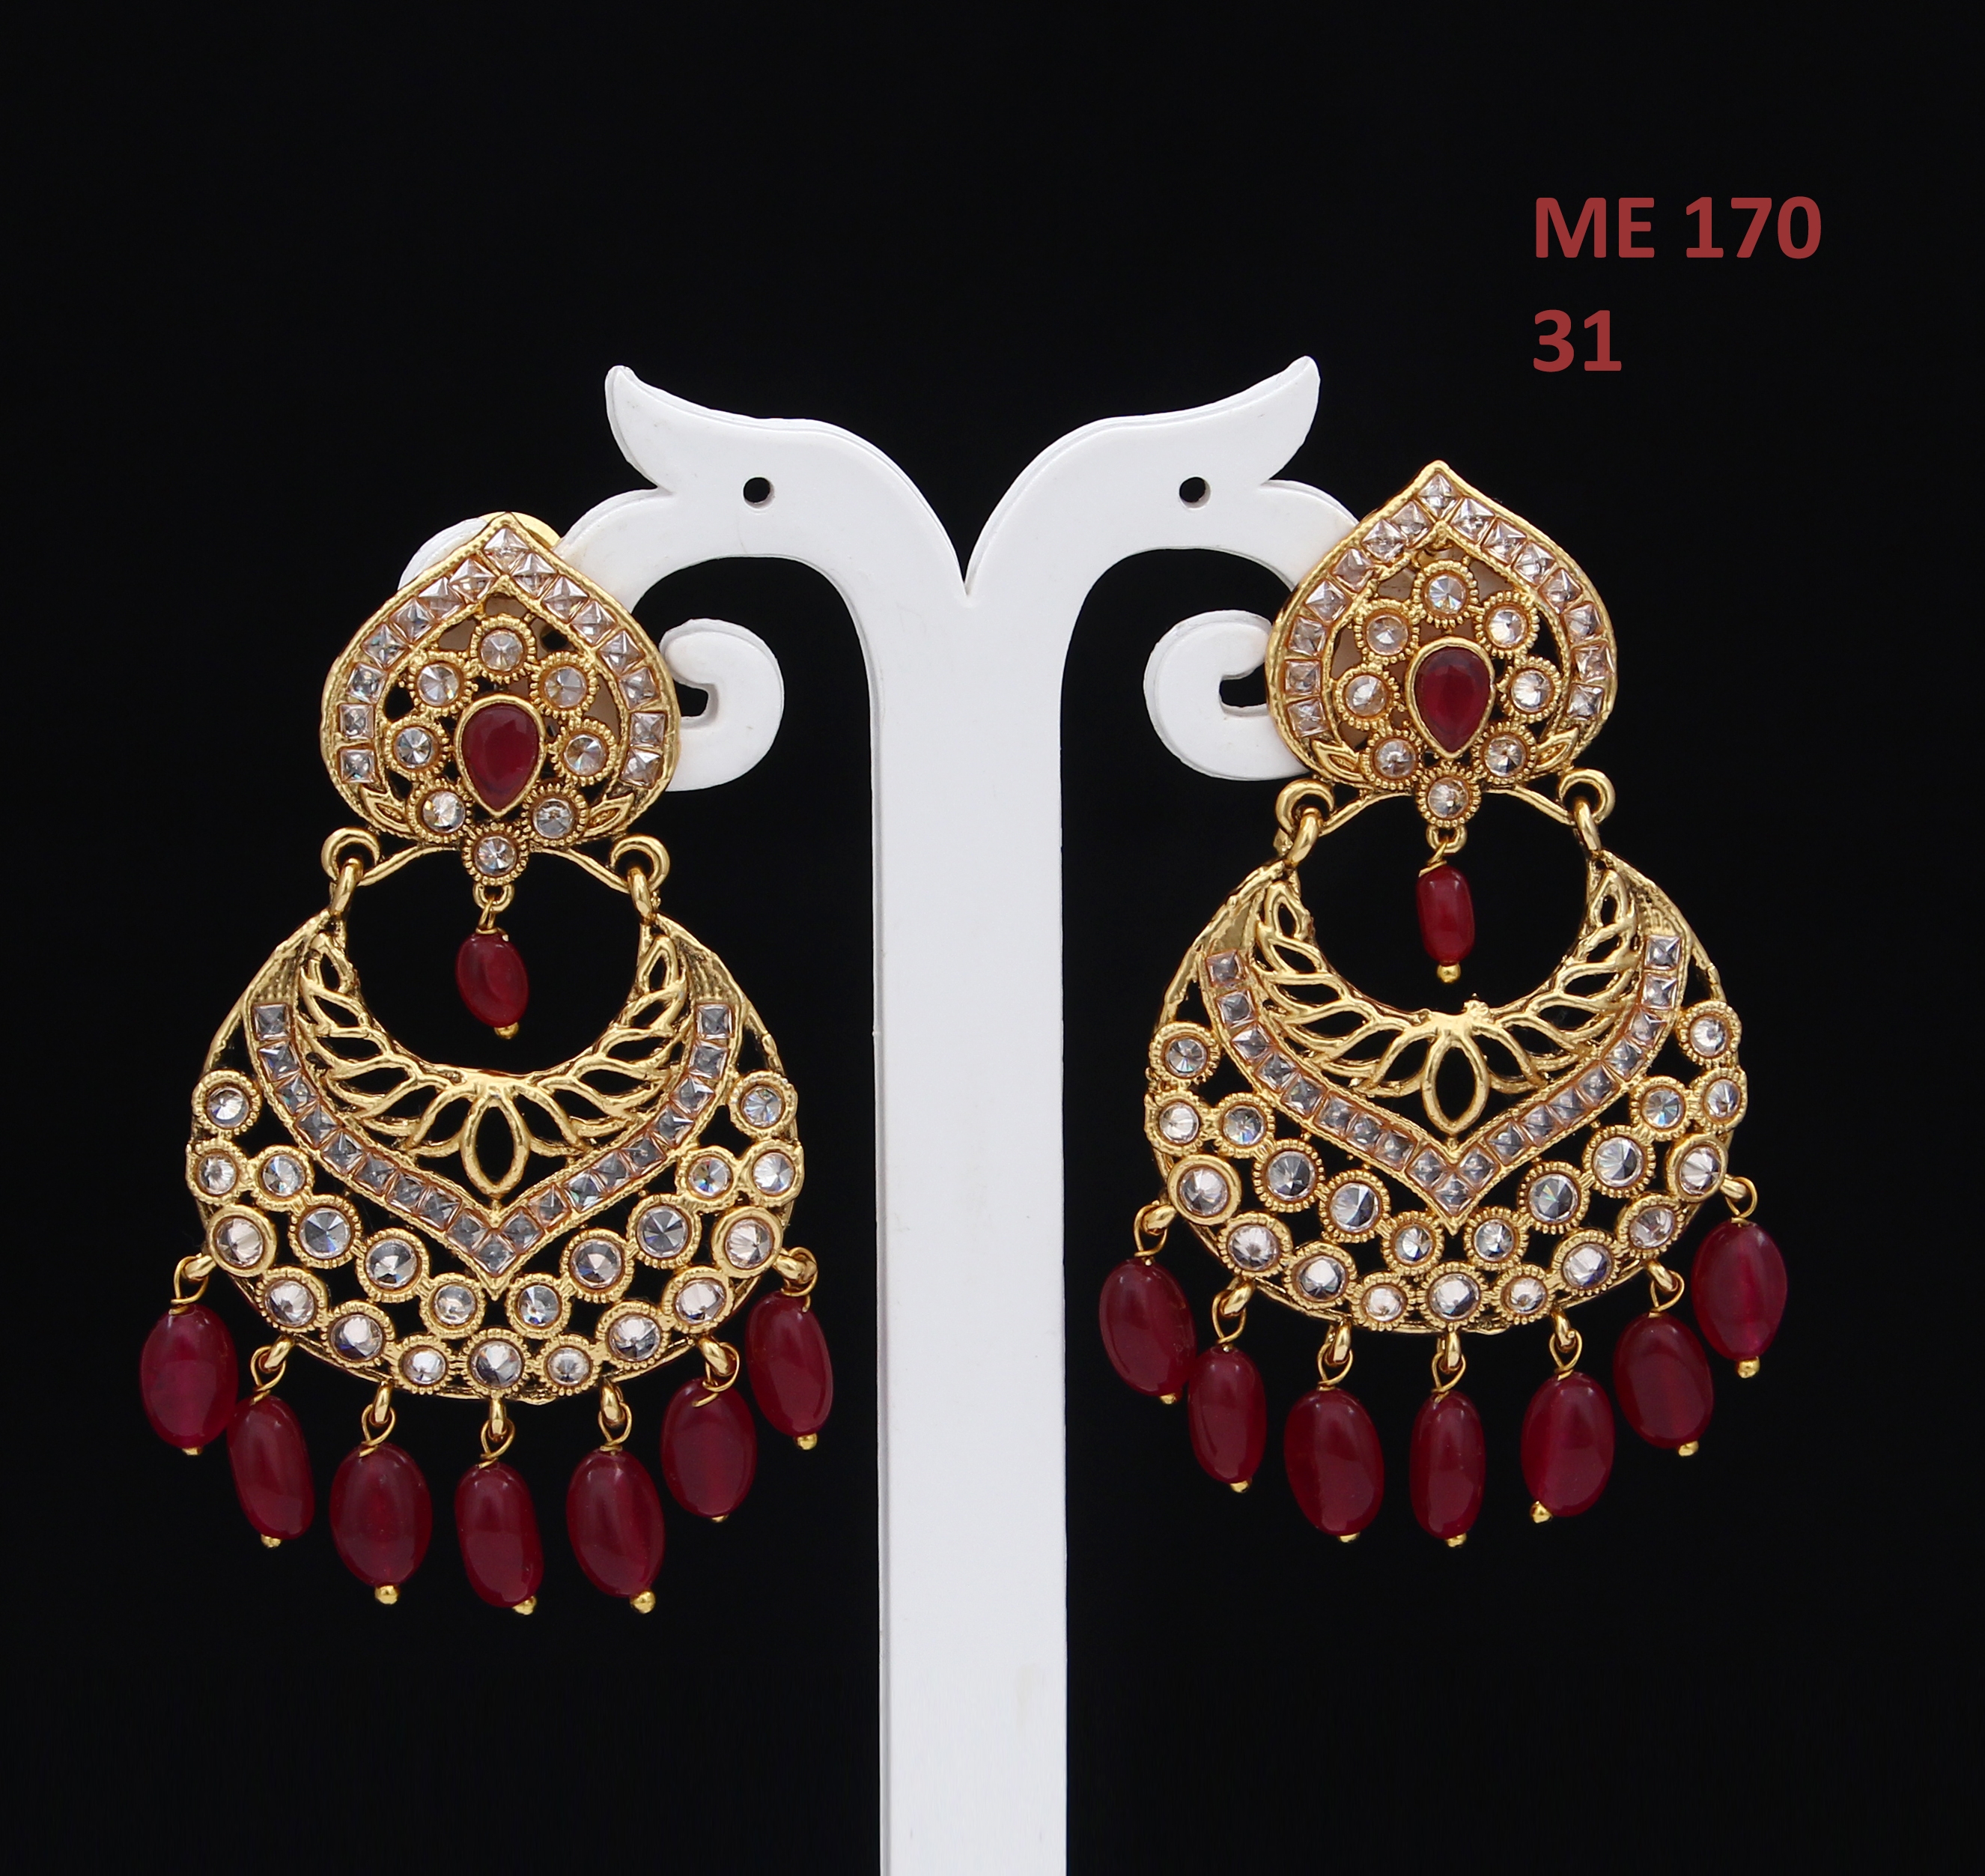 55Carat | Latest Fancy Dangle Drop Earring 18K Gold Plated Crystal, Red Ruby for Girlfriend Wife